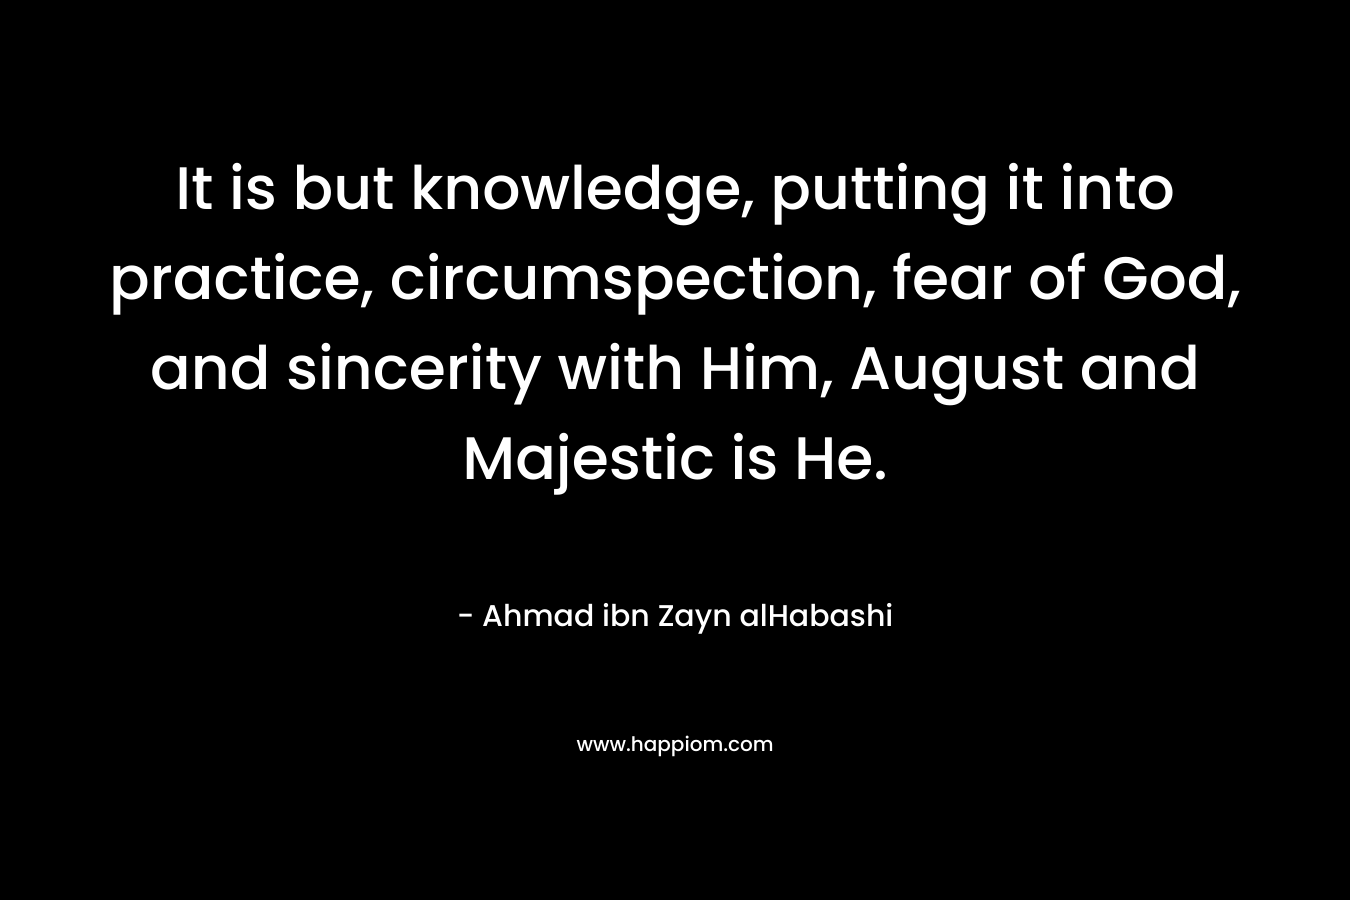 It is but knowledge, putting it into practice, circumspection, fear of God, and sincerity with Him, August and Majestic is He. – Ahmad ibn Zayn alHabashi